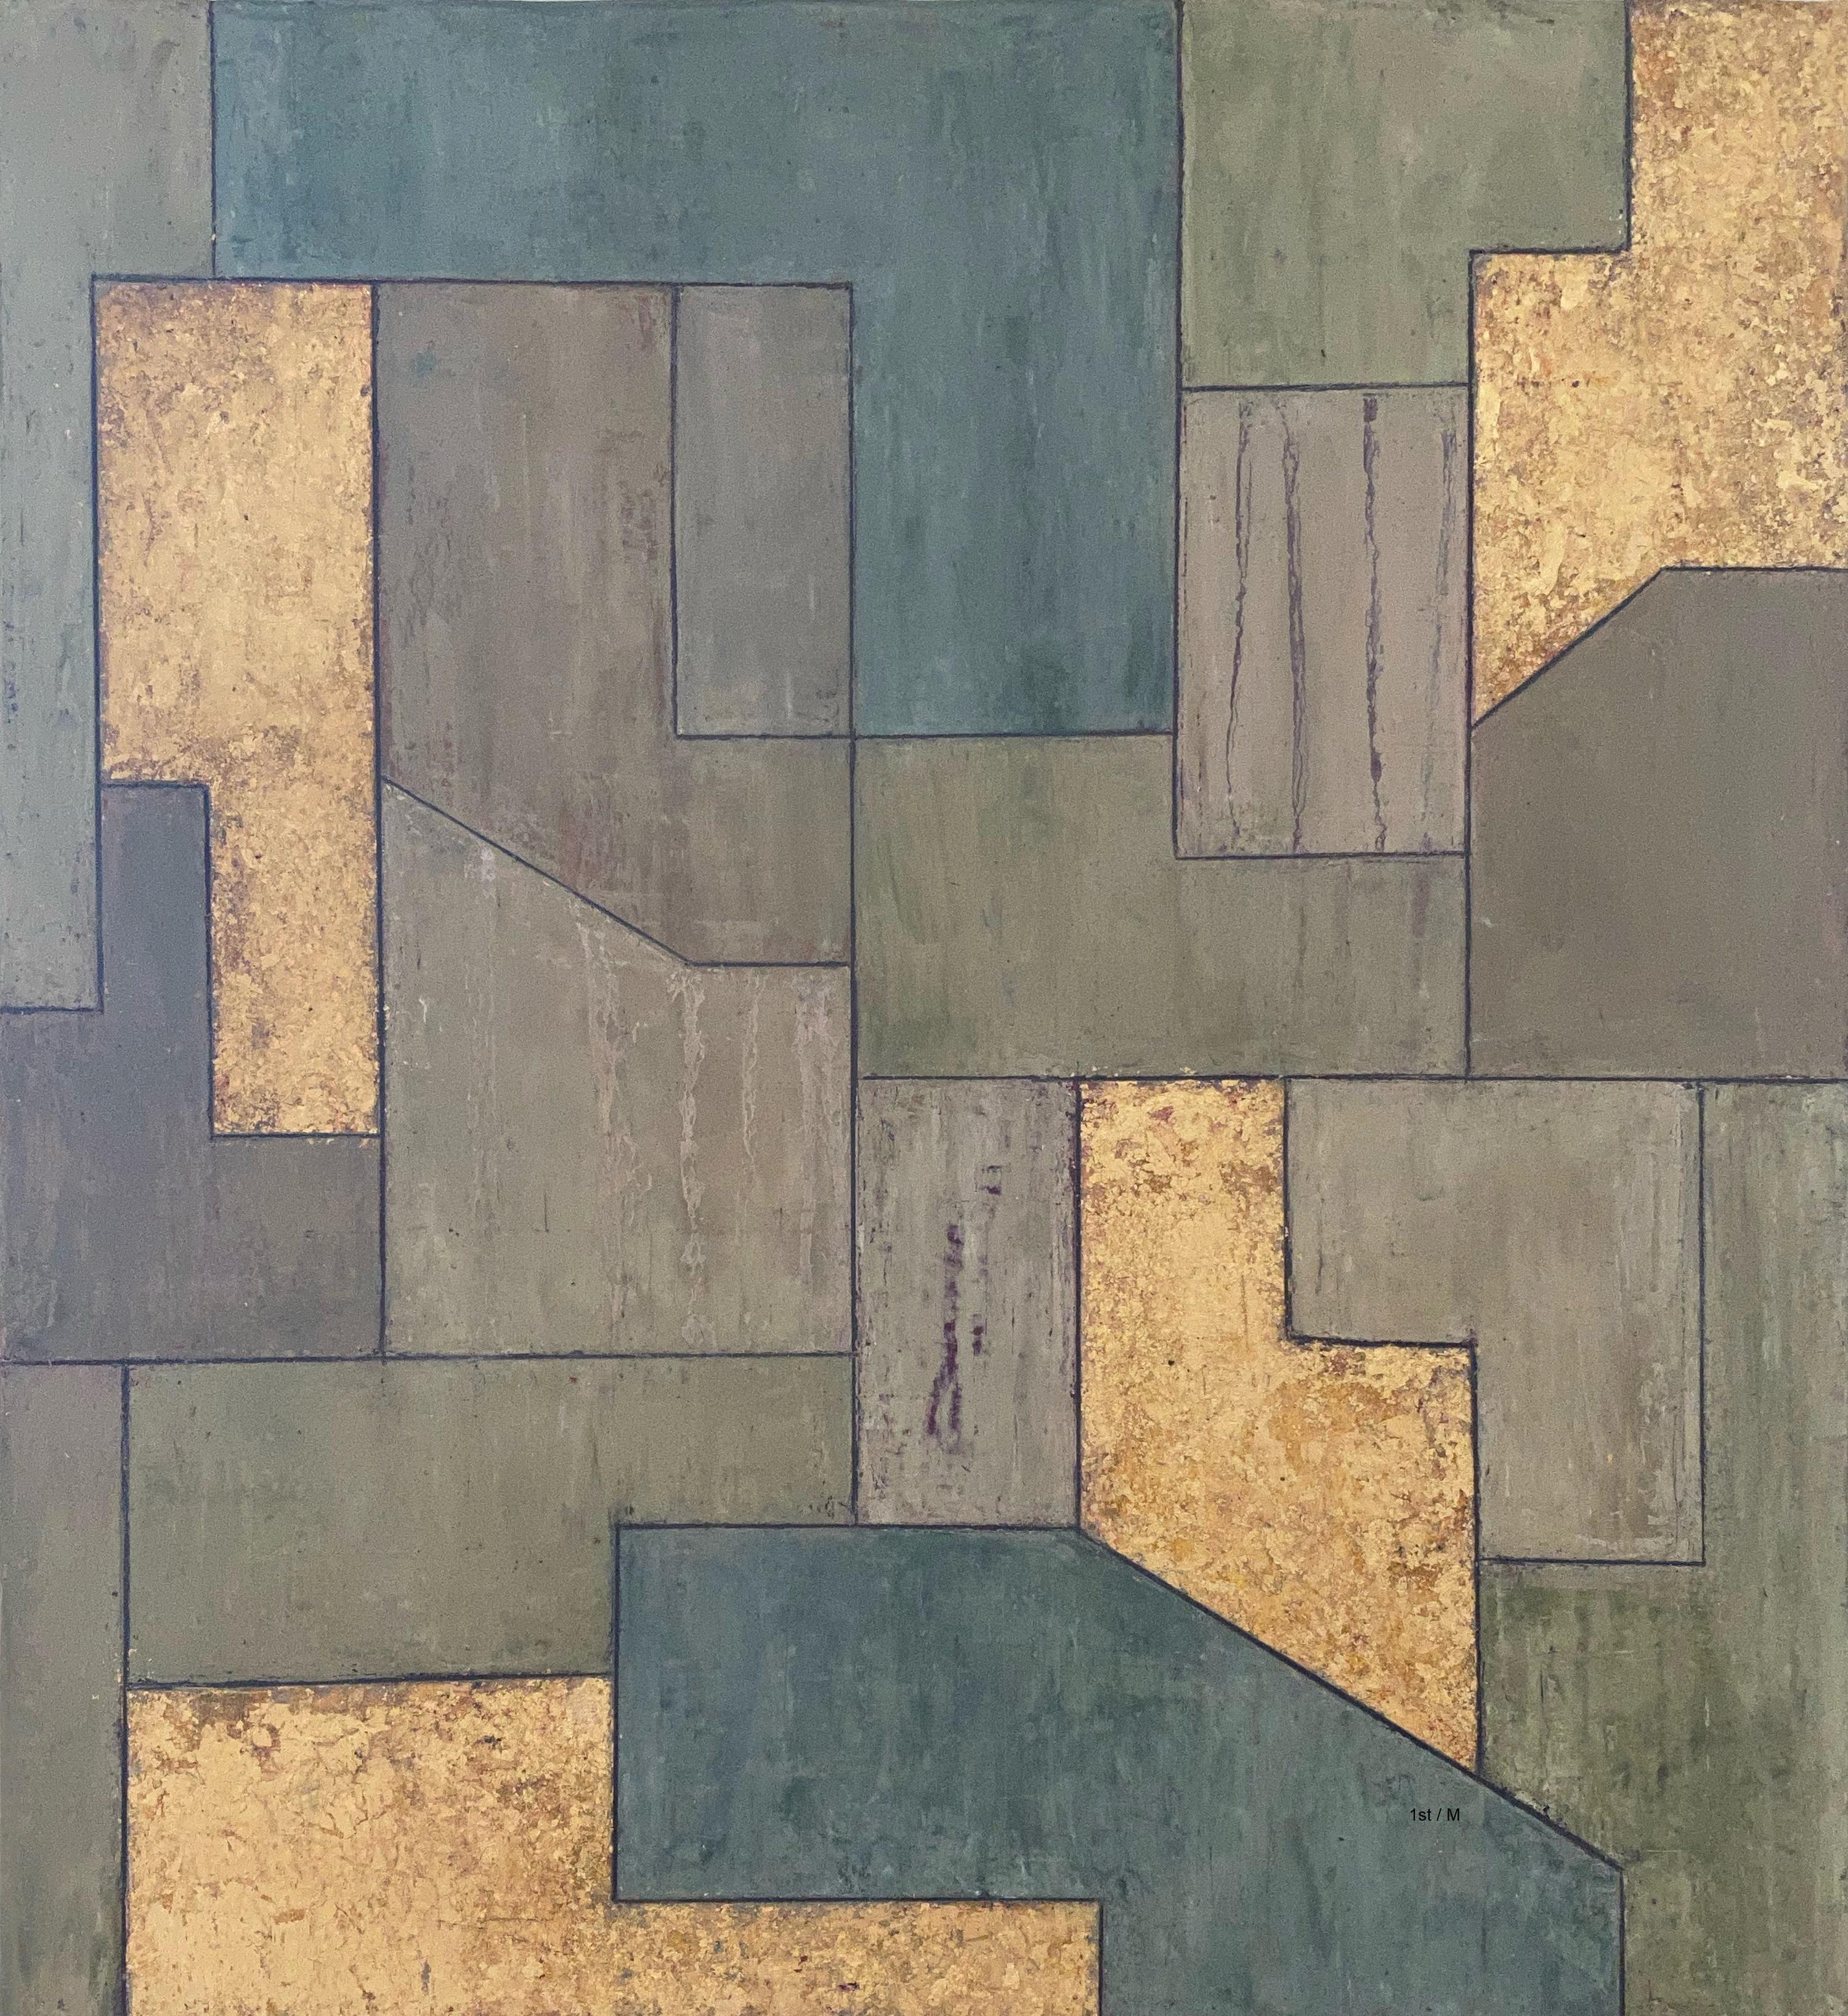 Stephen Cimini Abstract Painting - 24x22x2 in. - Oil, Gold Leaf - Geometric Architectural Contemporary, 4X Gold